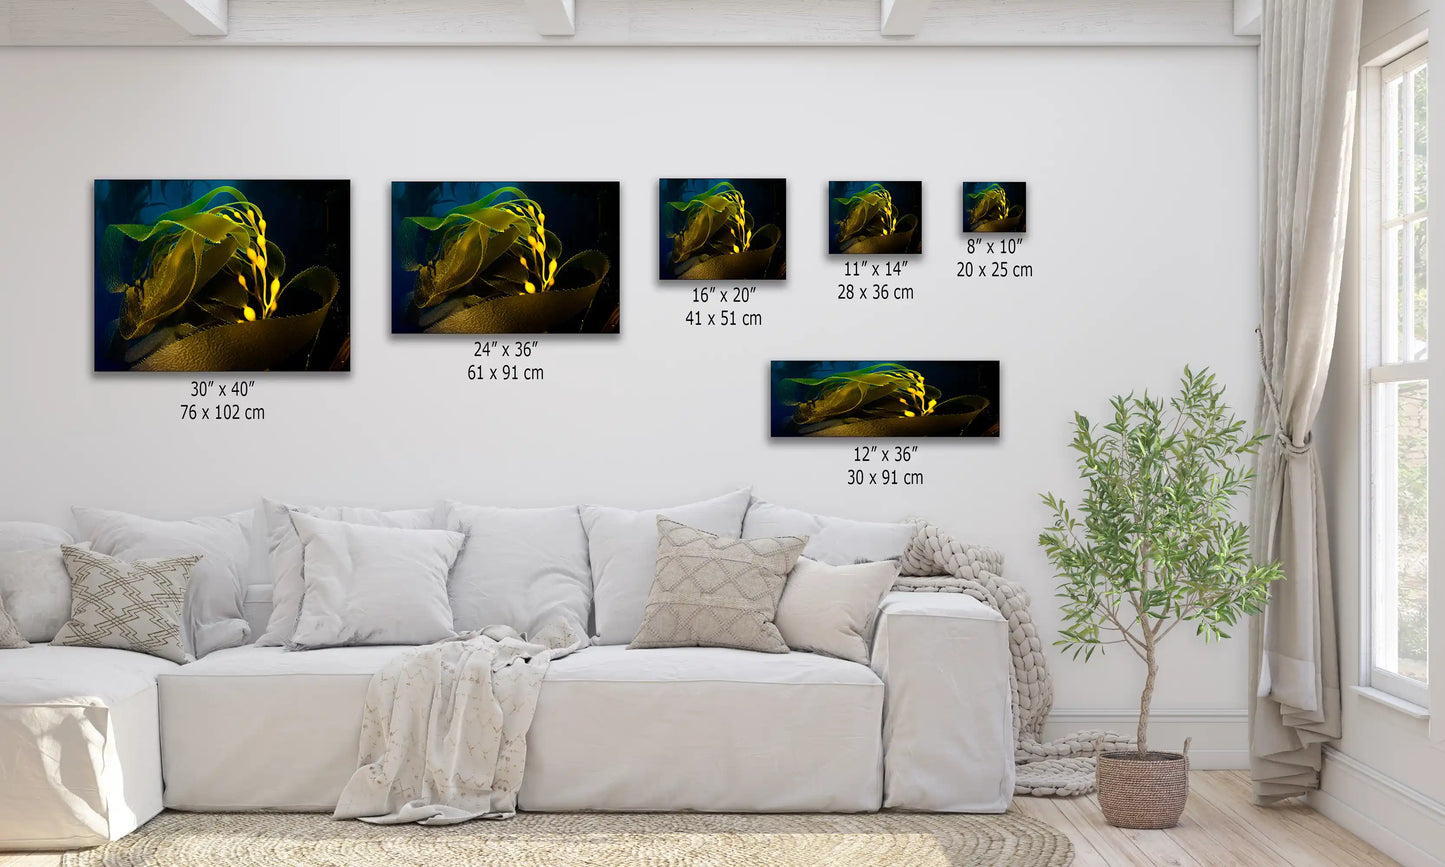 Living room wall adorned with various sizes of canvas prints featuring an underwater photograph of glowing kelp.